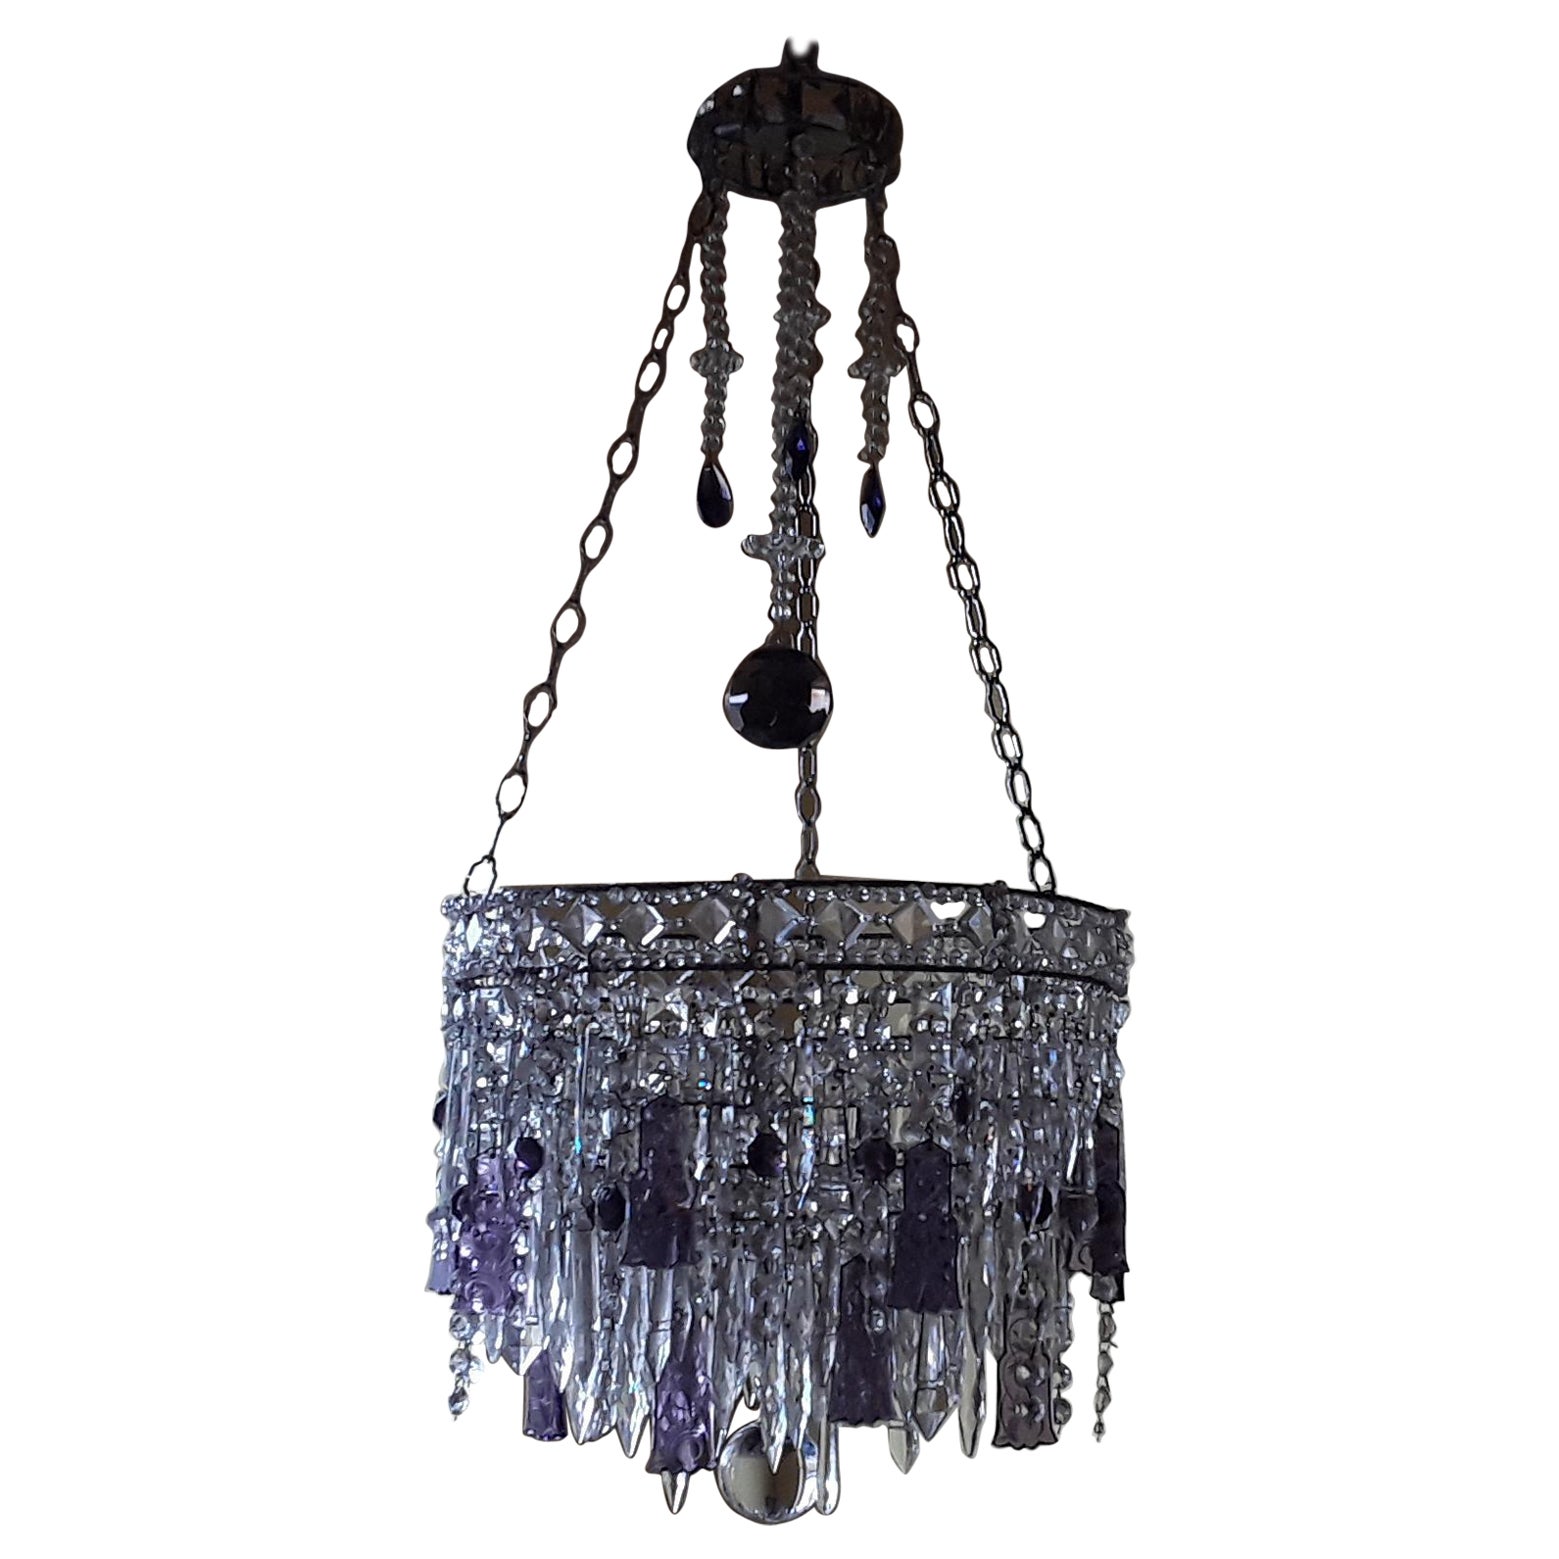 1940s French Regency Cut Amethyst & Clear Loaded with Crystal Tiered Chandelier For Sale